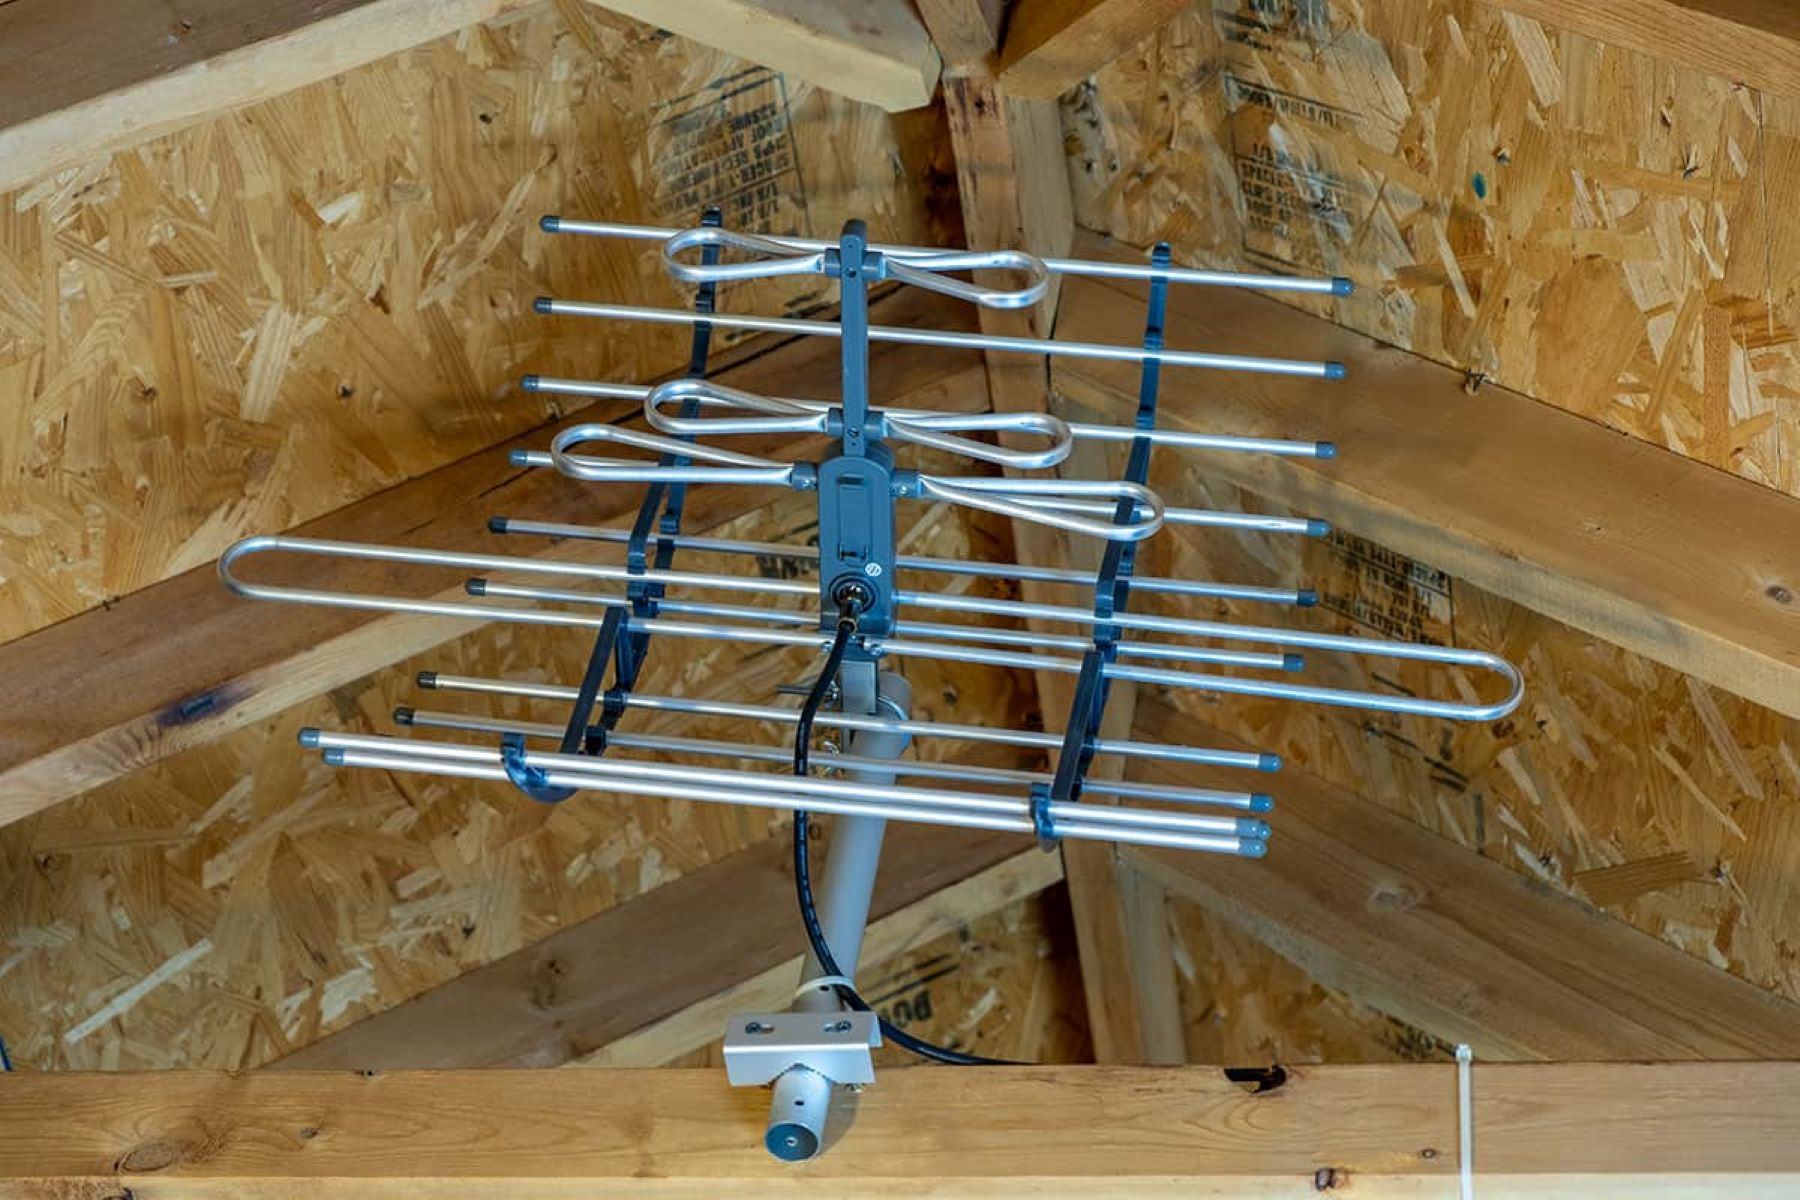 How To Install A TV Antenna In The Attic